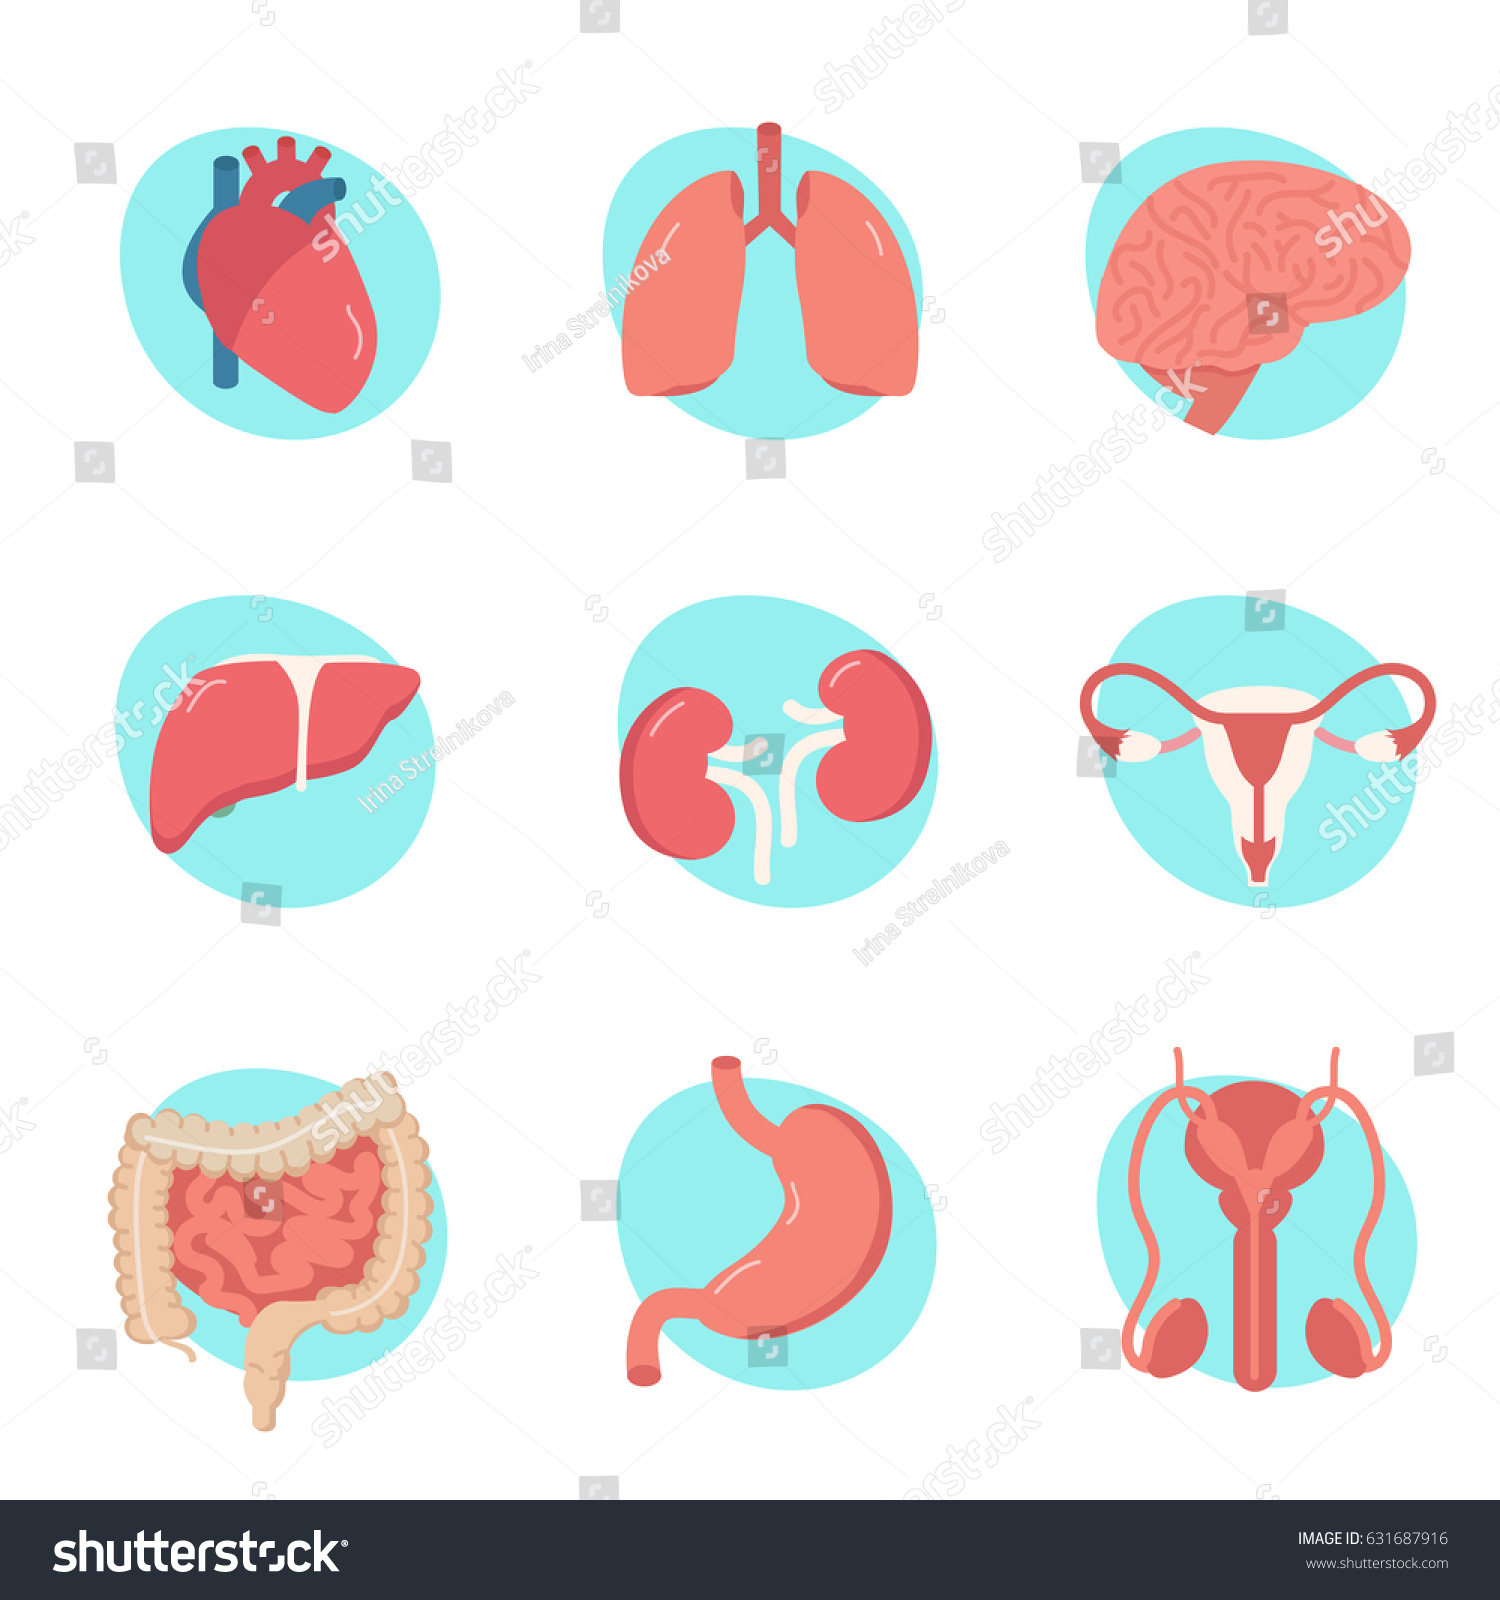 Human Organs Concept Design Web Banners Stock Vector (Royalty Free ...